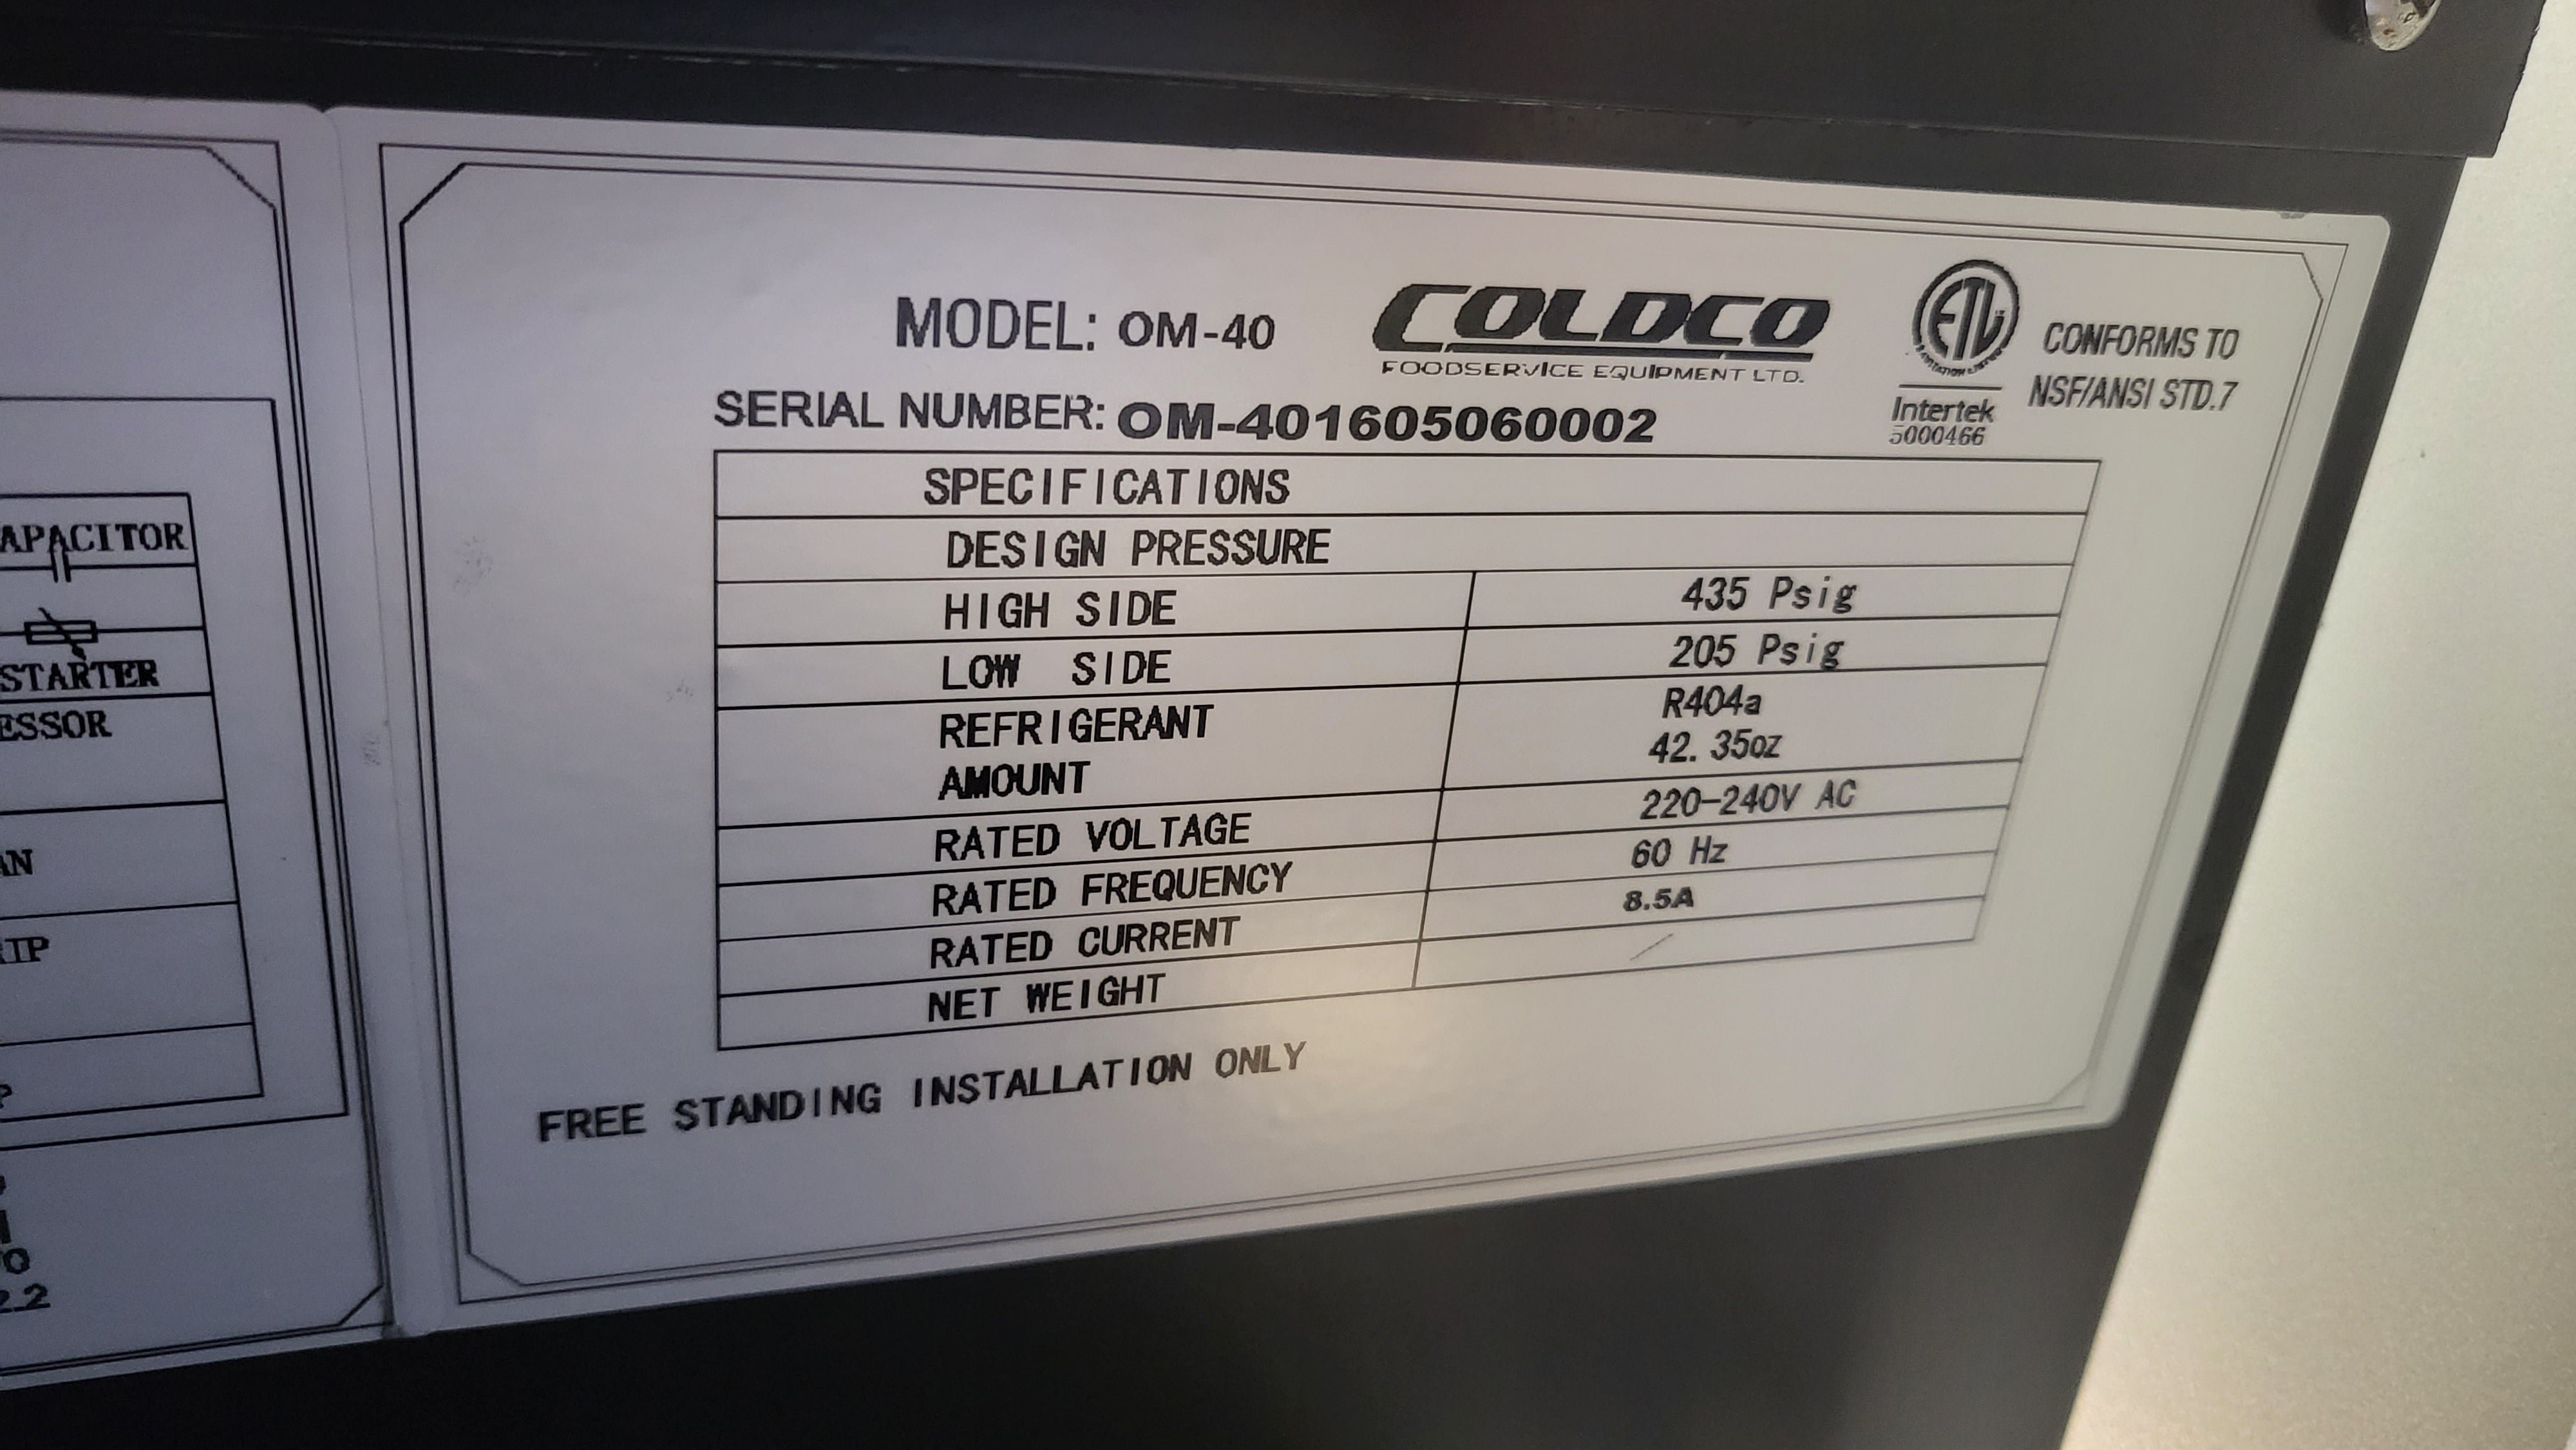 Thumbnail - Coldco OM-40 Multi-Deck Open Cooler